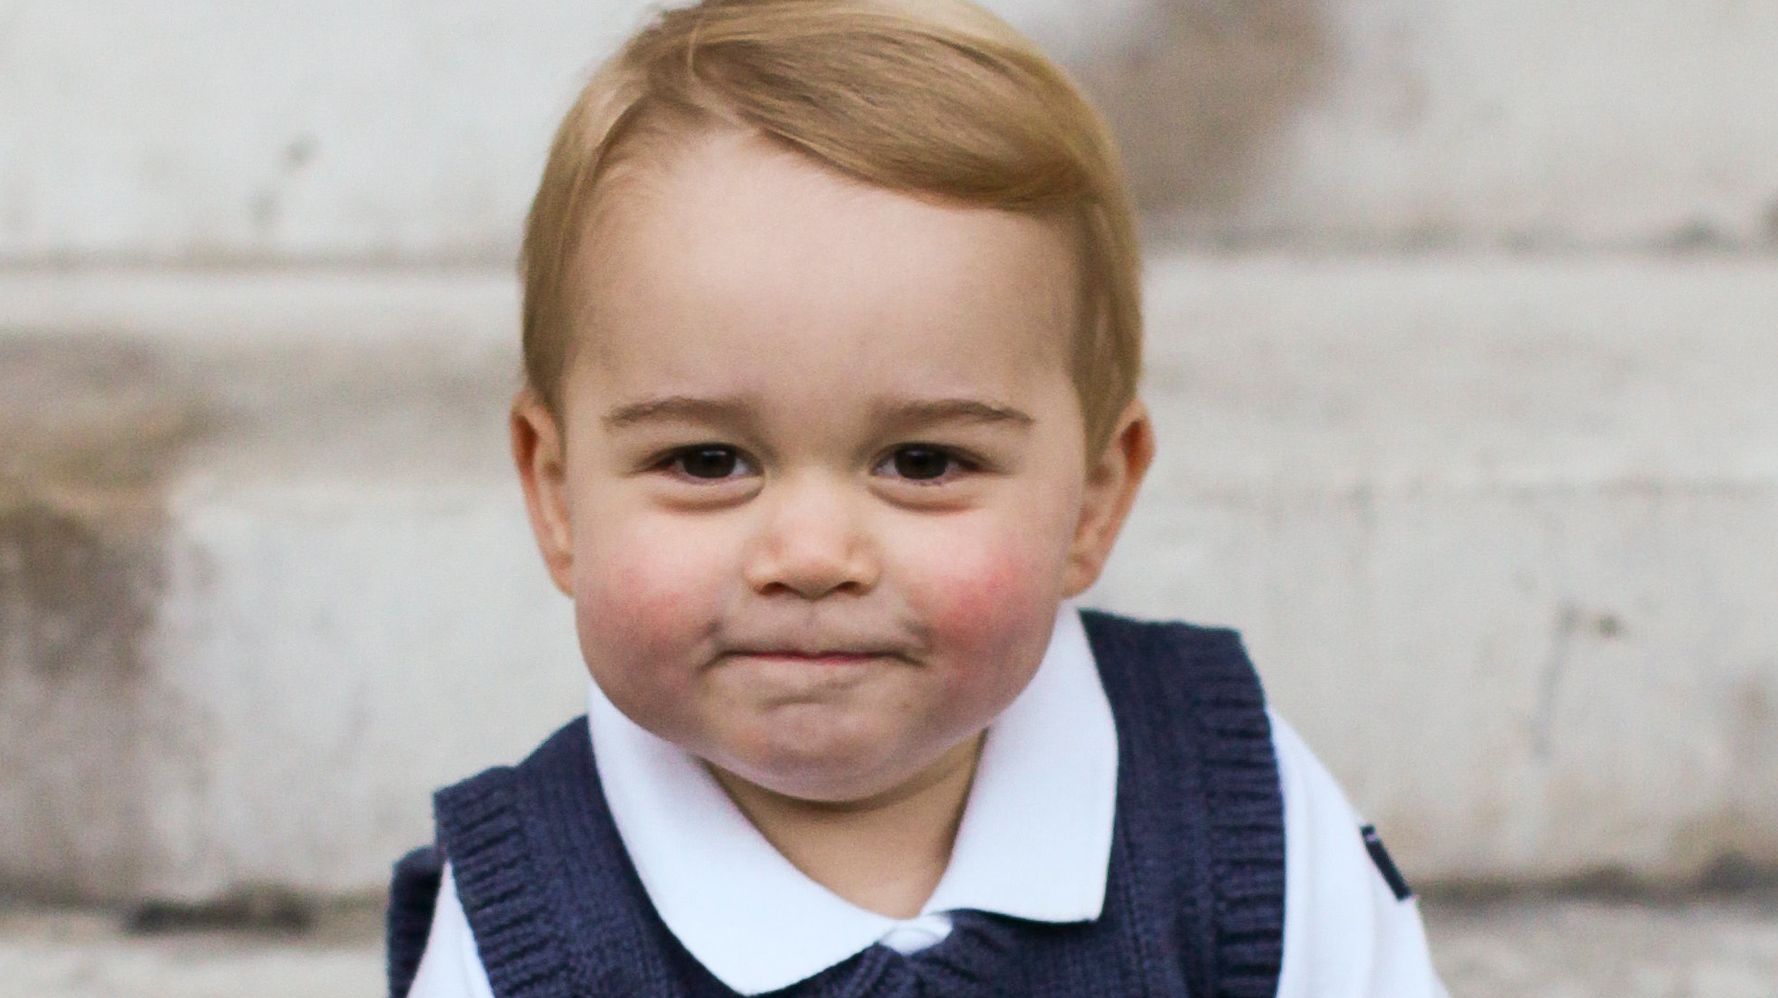 prince george photos,baby george photos,prince gorge pictures,baby george p...